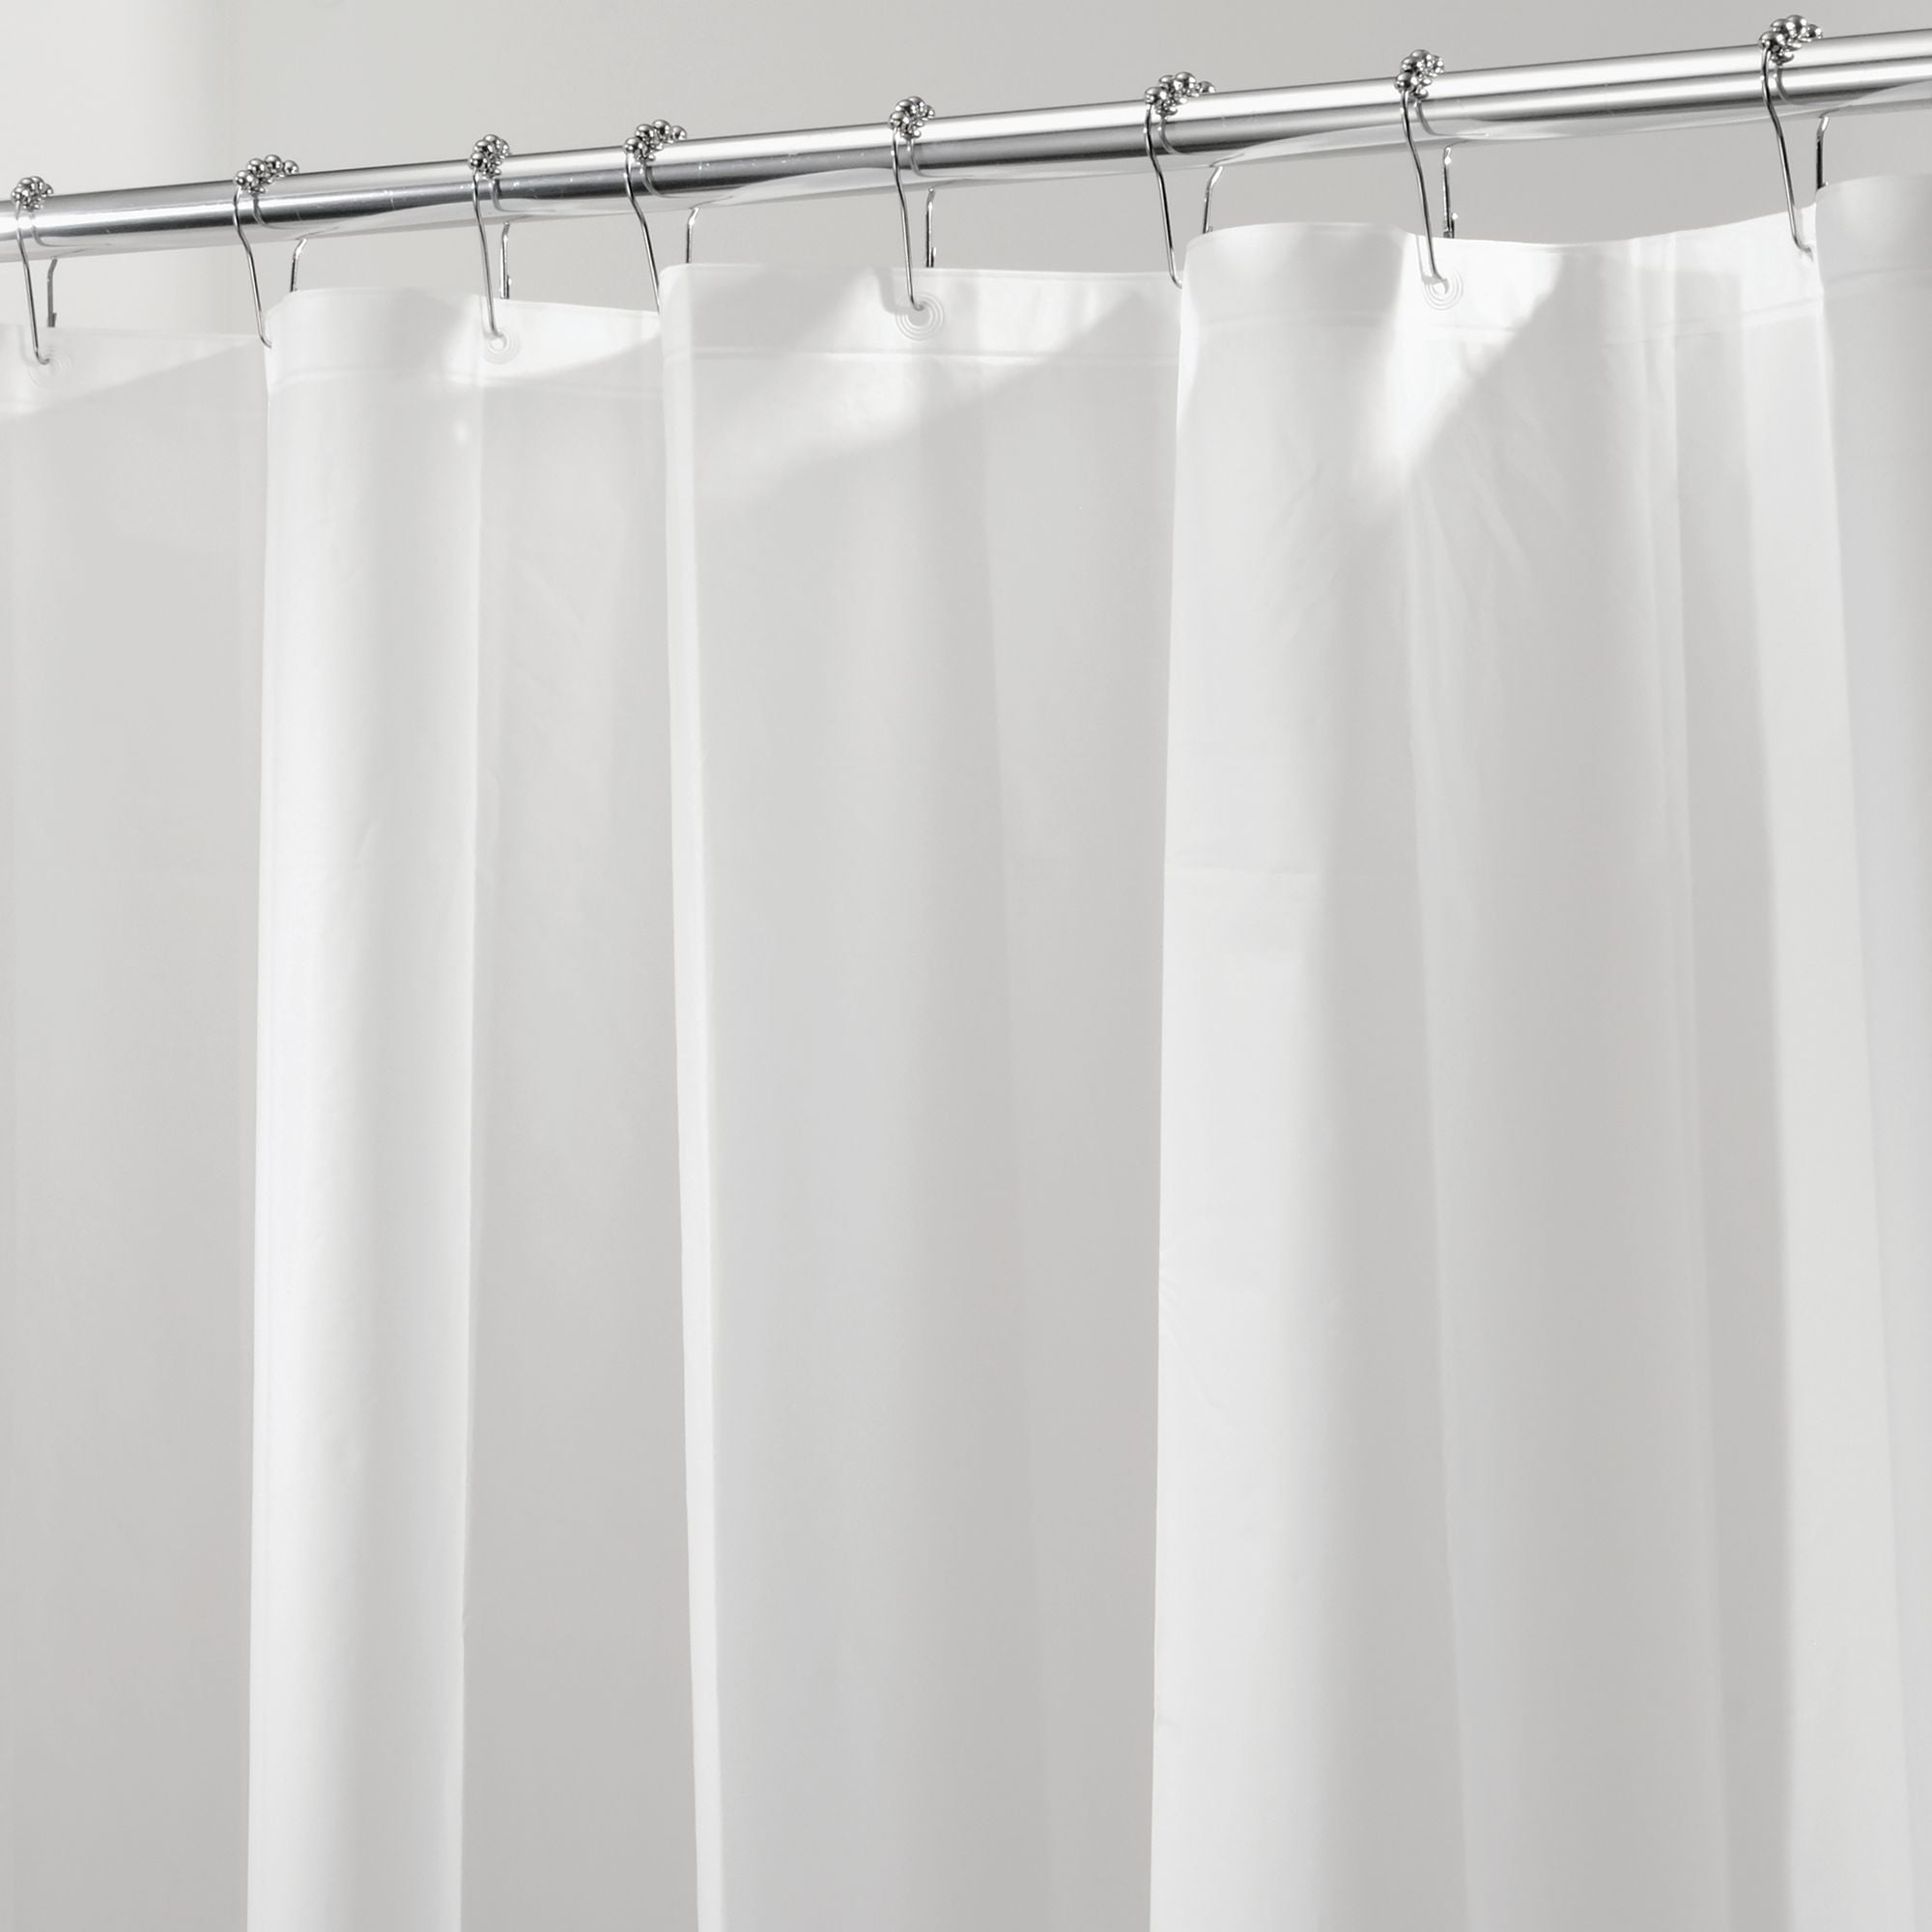 Made of Mould-Free PEVA 183.0 x 183.0 cm Clear InterDesign 3.0 Liner Curtain for Shower 